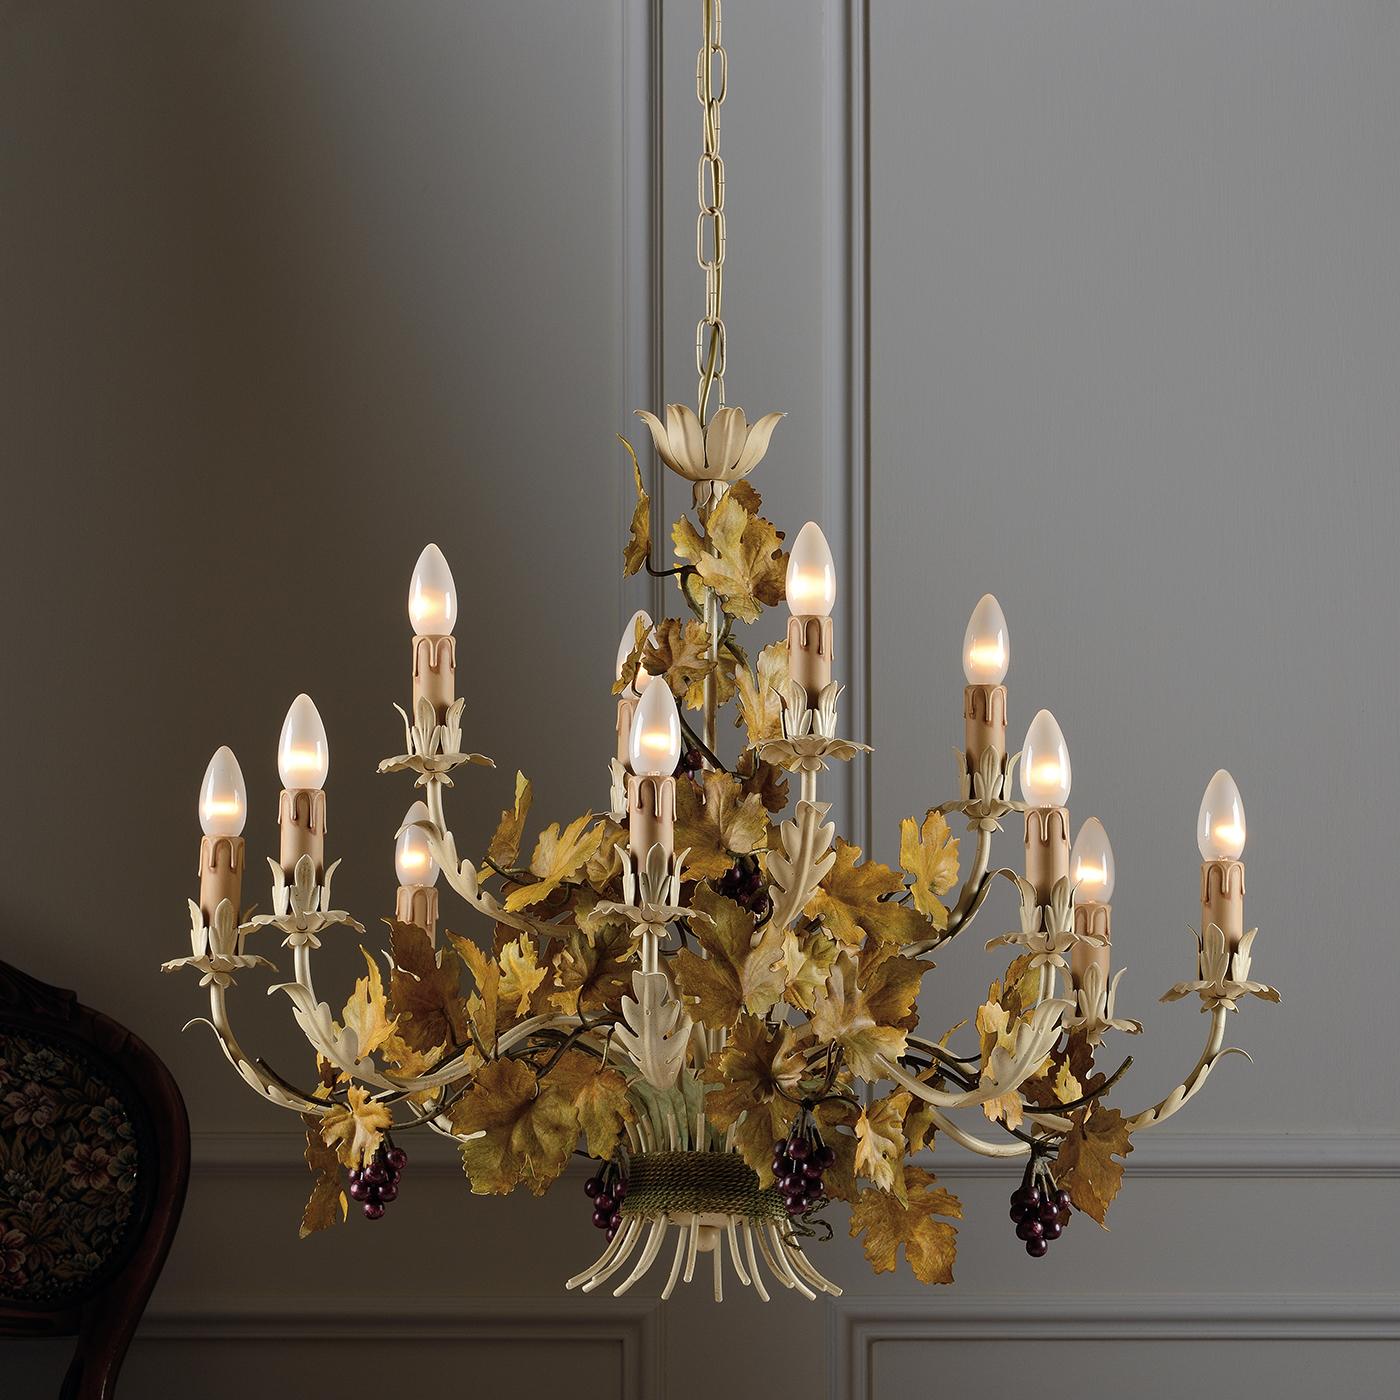 This delightful antiqued metal chandelier speaks of ages past and is hand-decorated with golden grape leaves and small bunches of grapes. Hanging from a metal chain and with twelve lightbulbs resting on upturned arms, this light fixture will be a